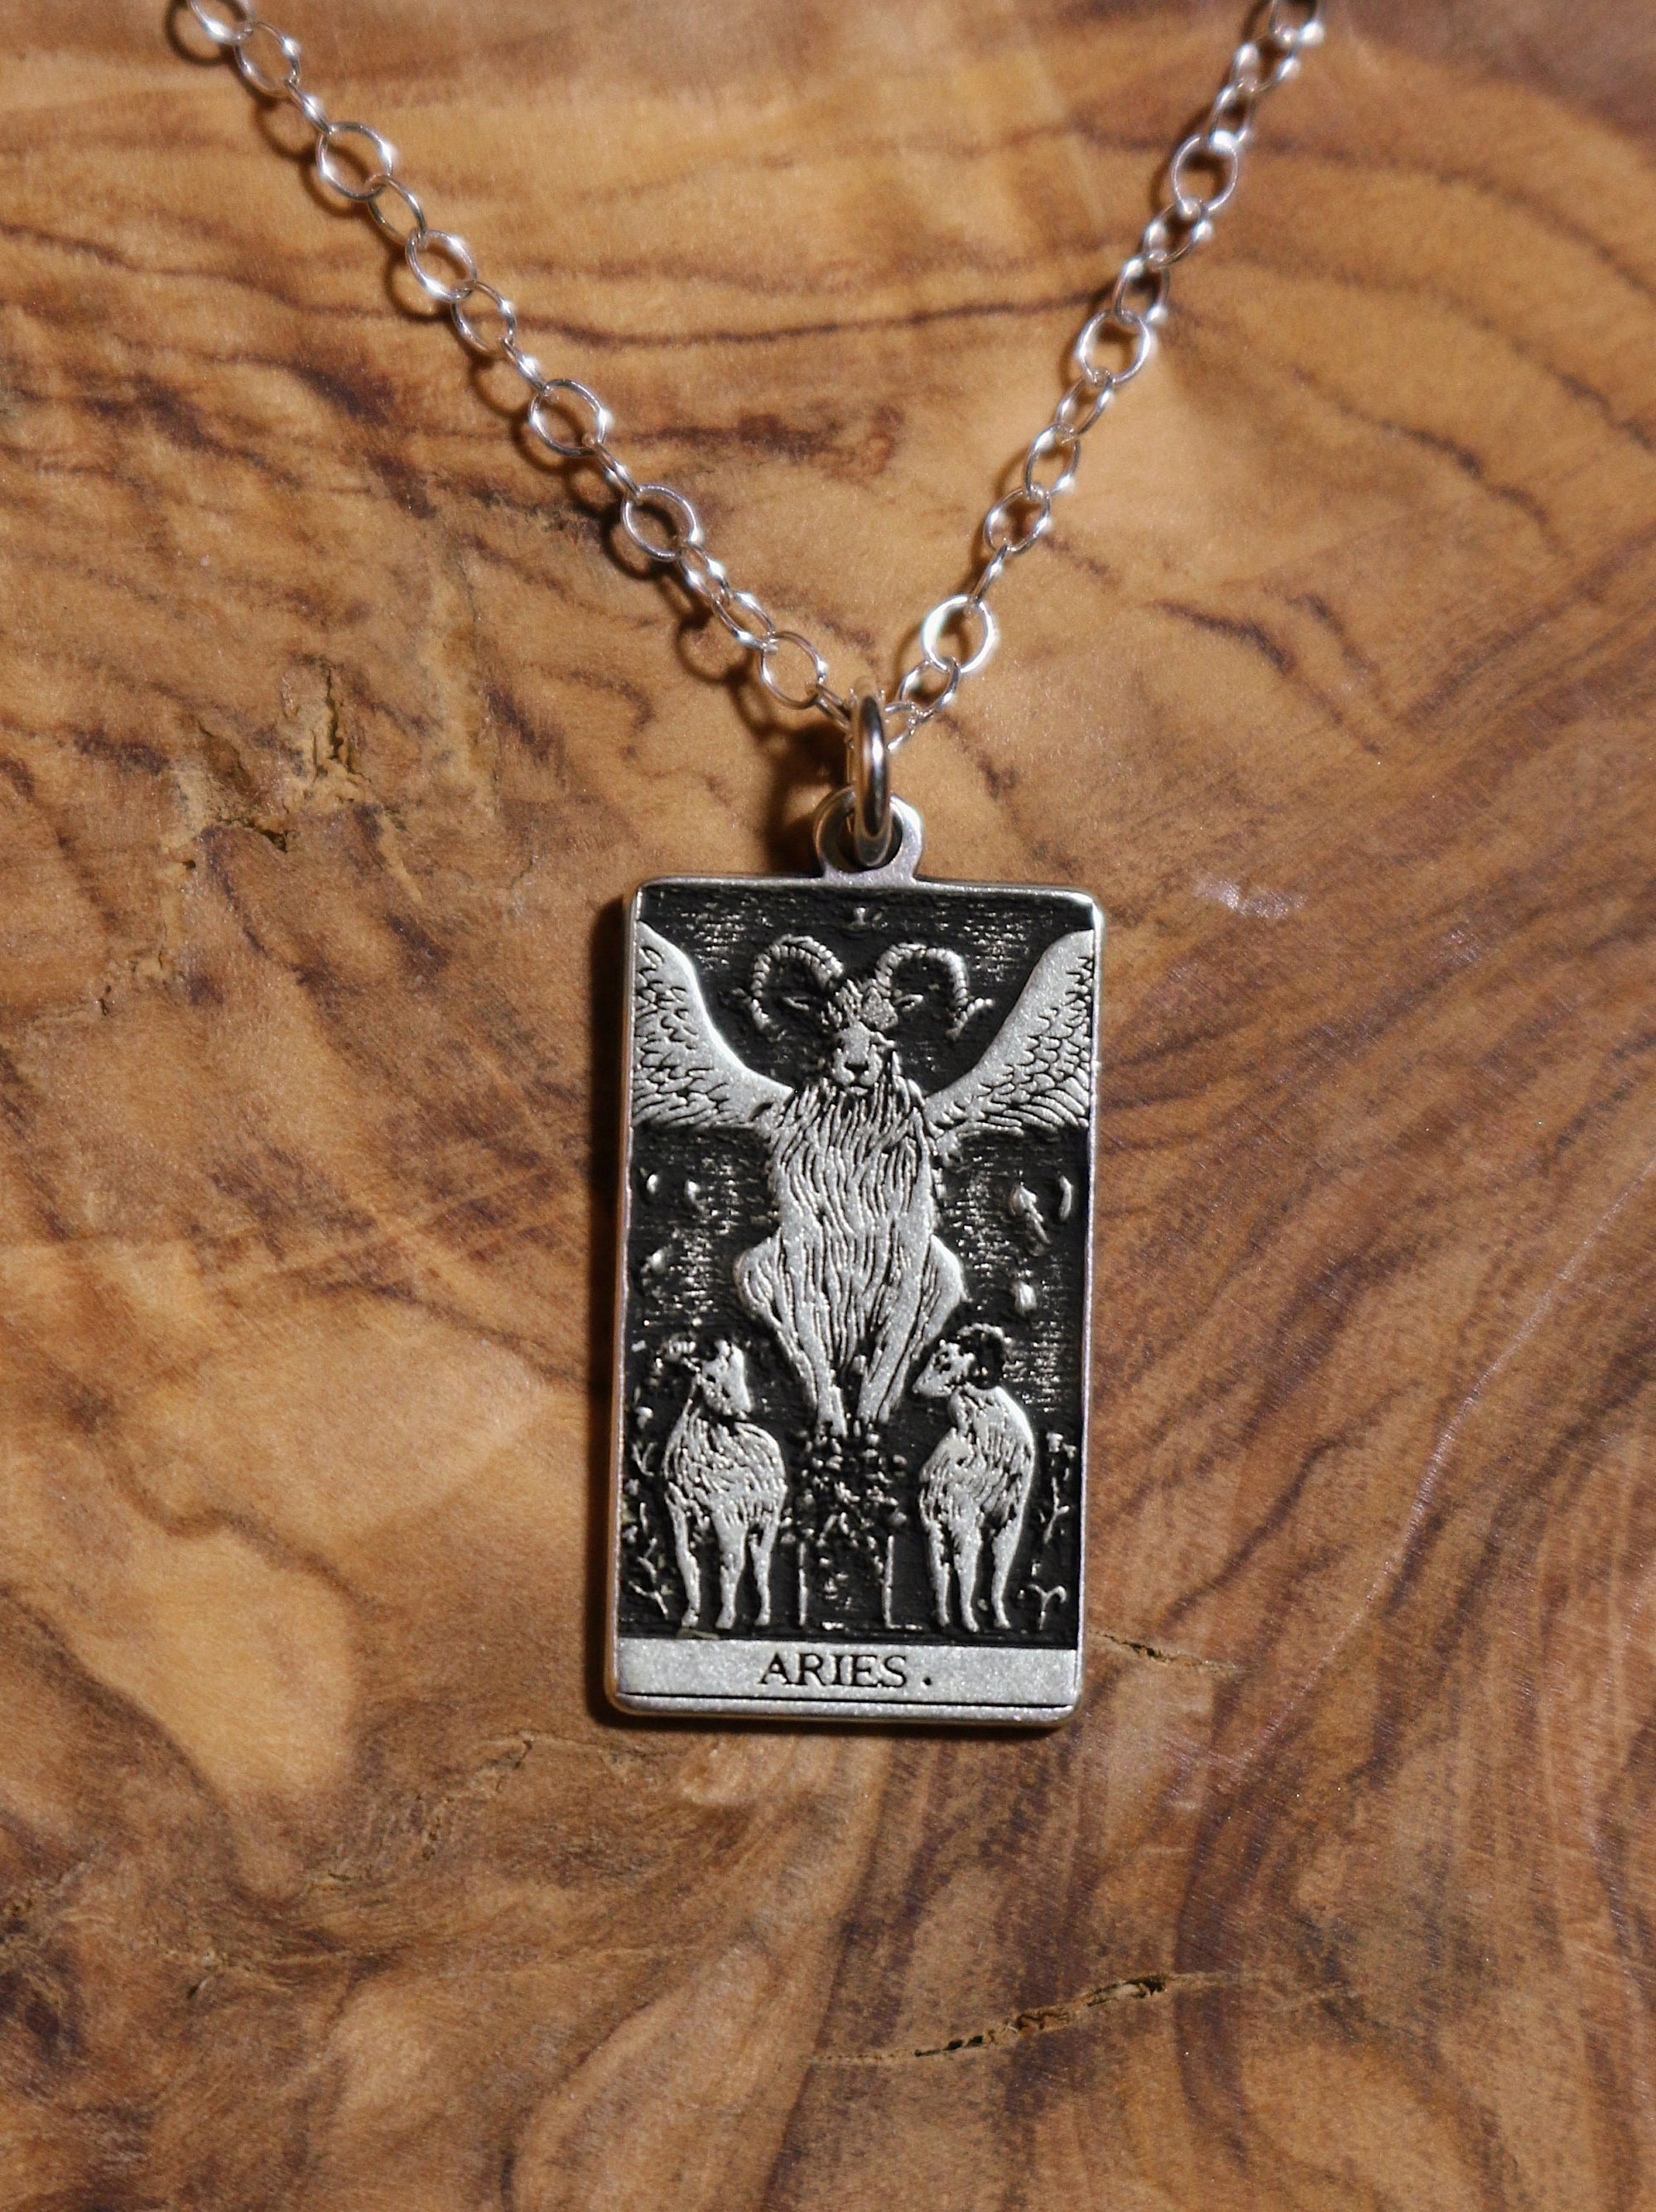 Aries The Devil Tarot Card Inspired Zodiac Necklace - Sterling Silver